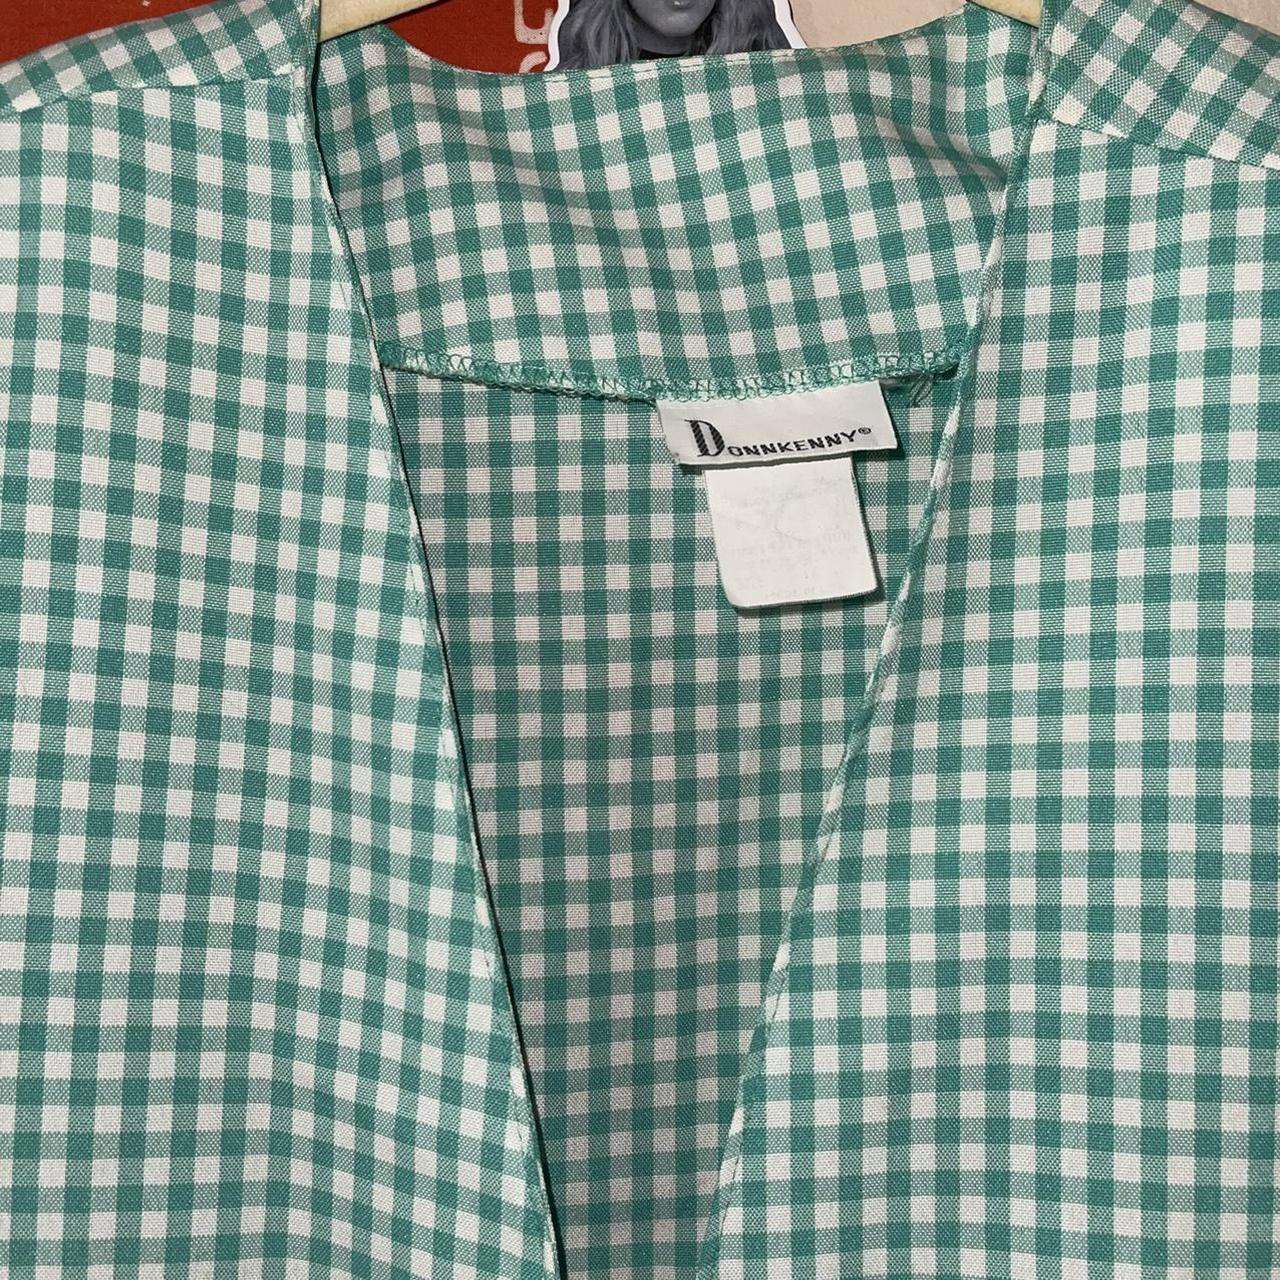 Product Image 2 - Green and white checkered vintage